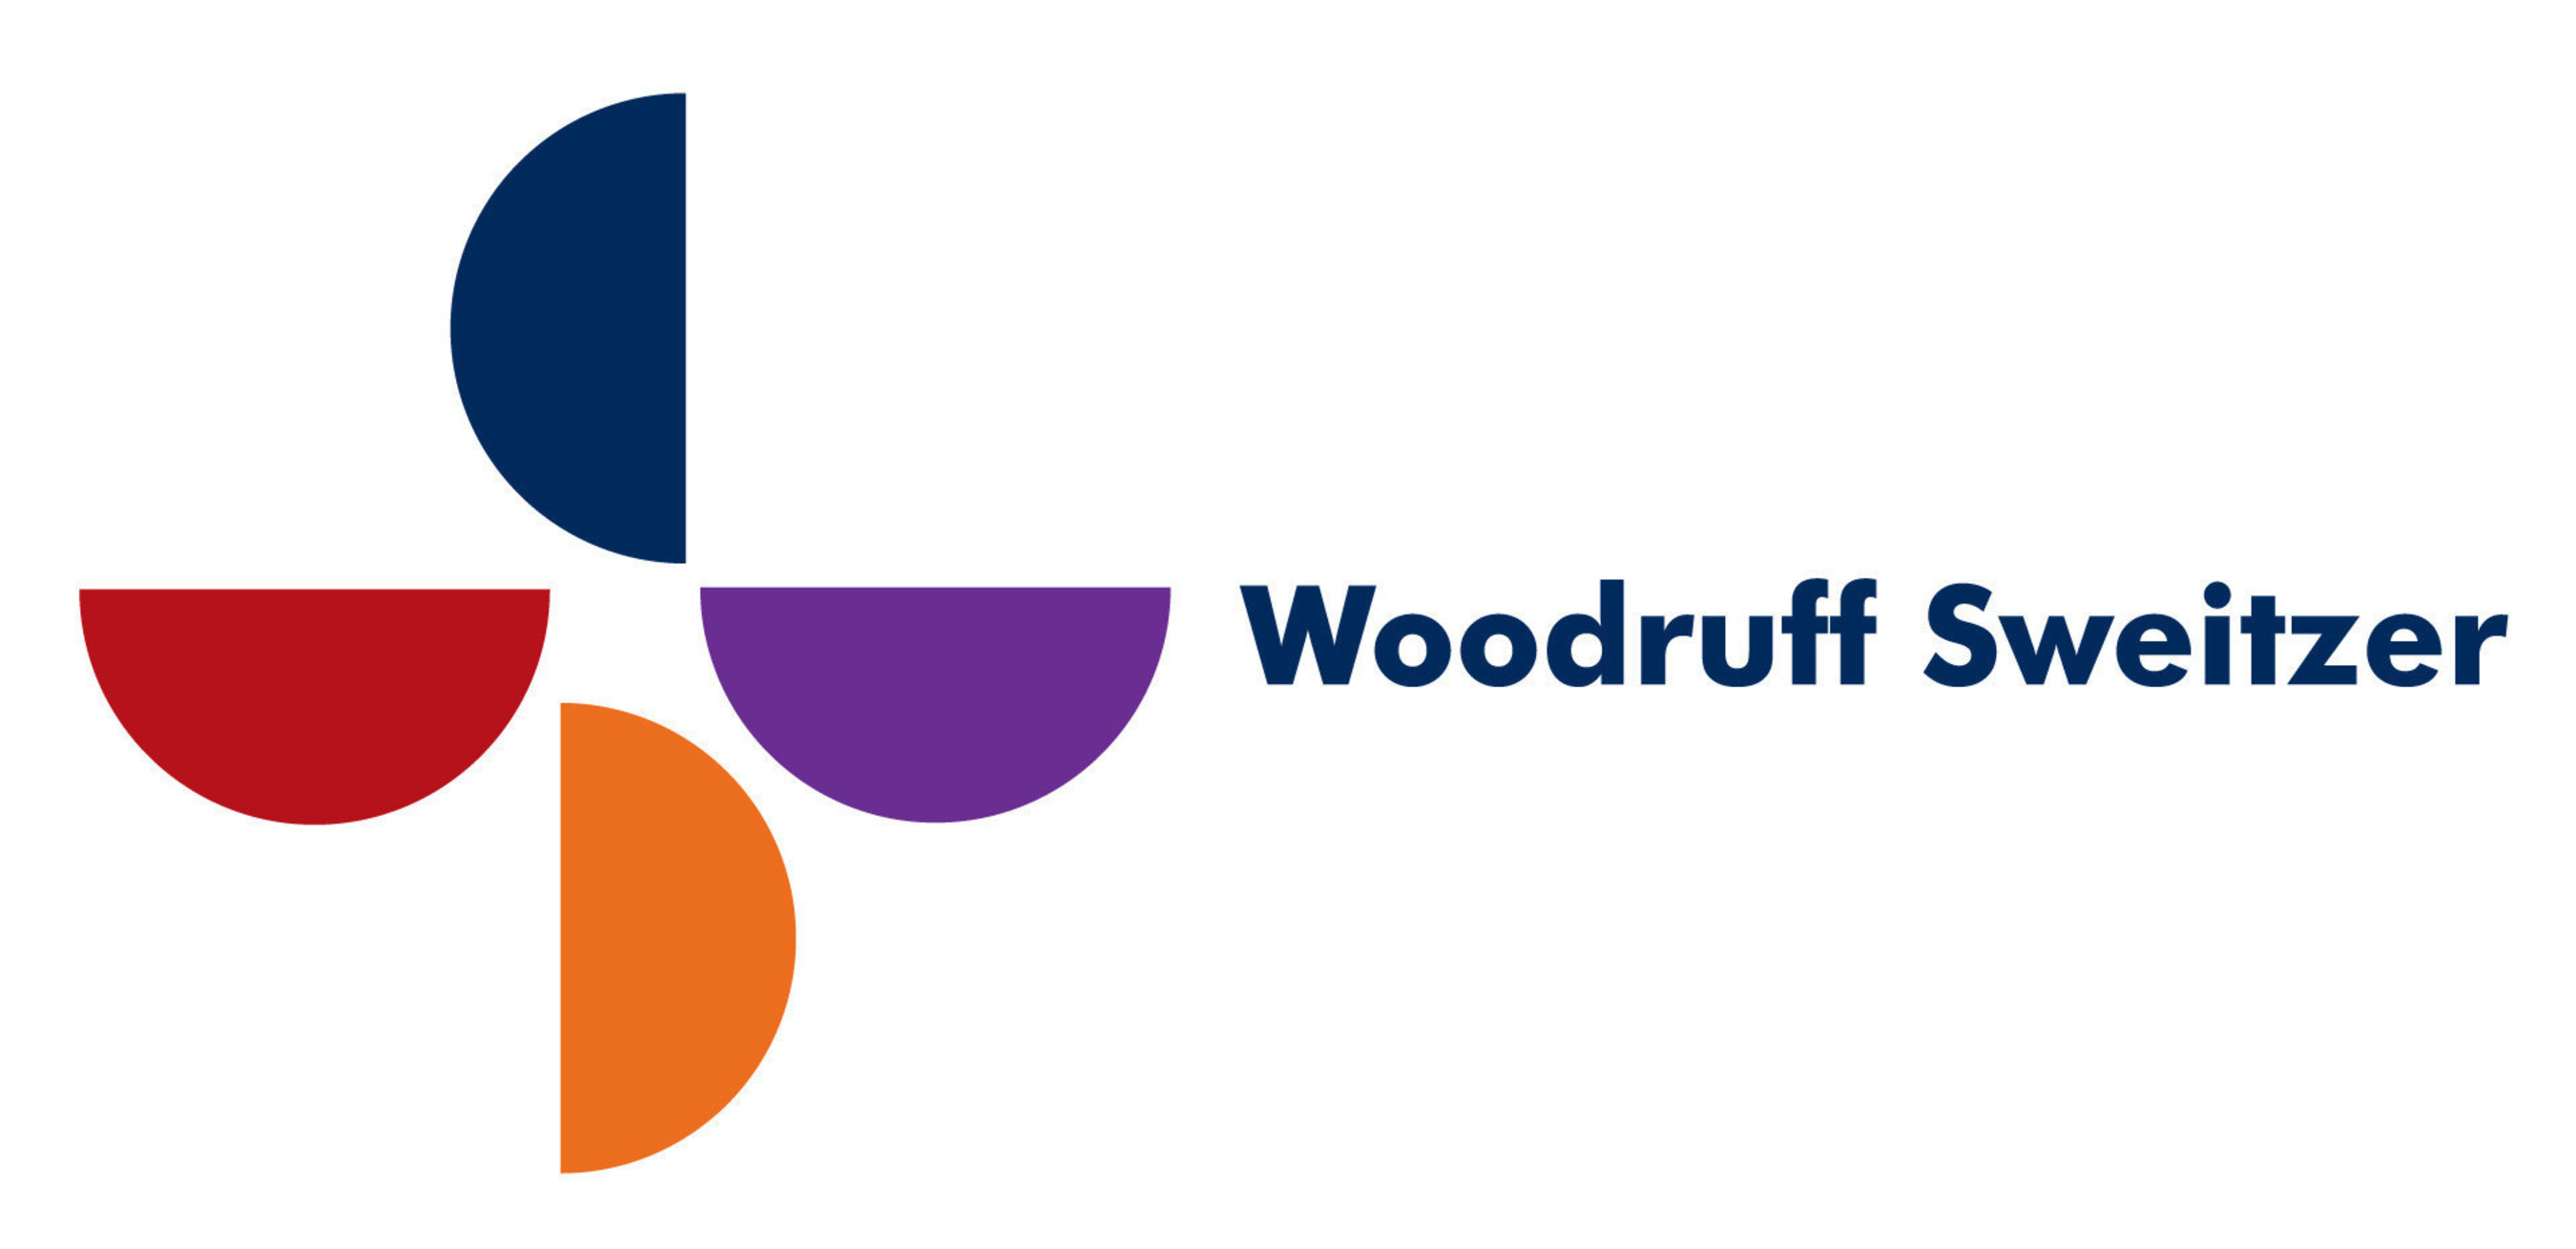 Woodruff Sweitzer has 140 employees with offices in Missouri, Minnesota and Alberta, Canada.